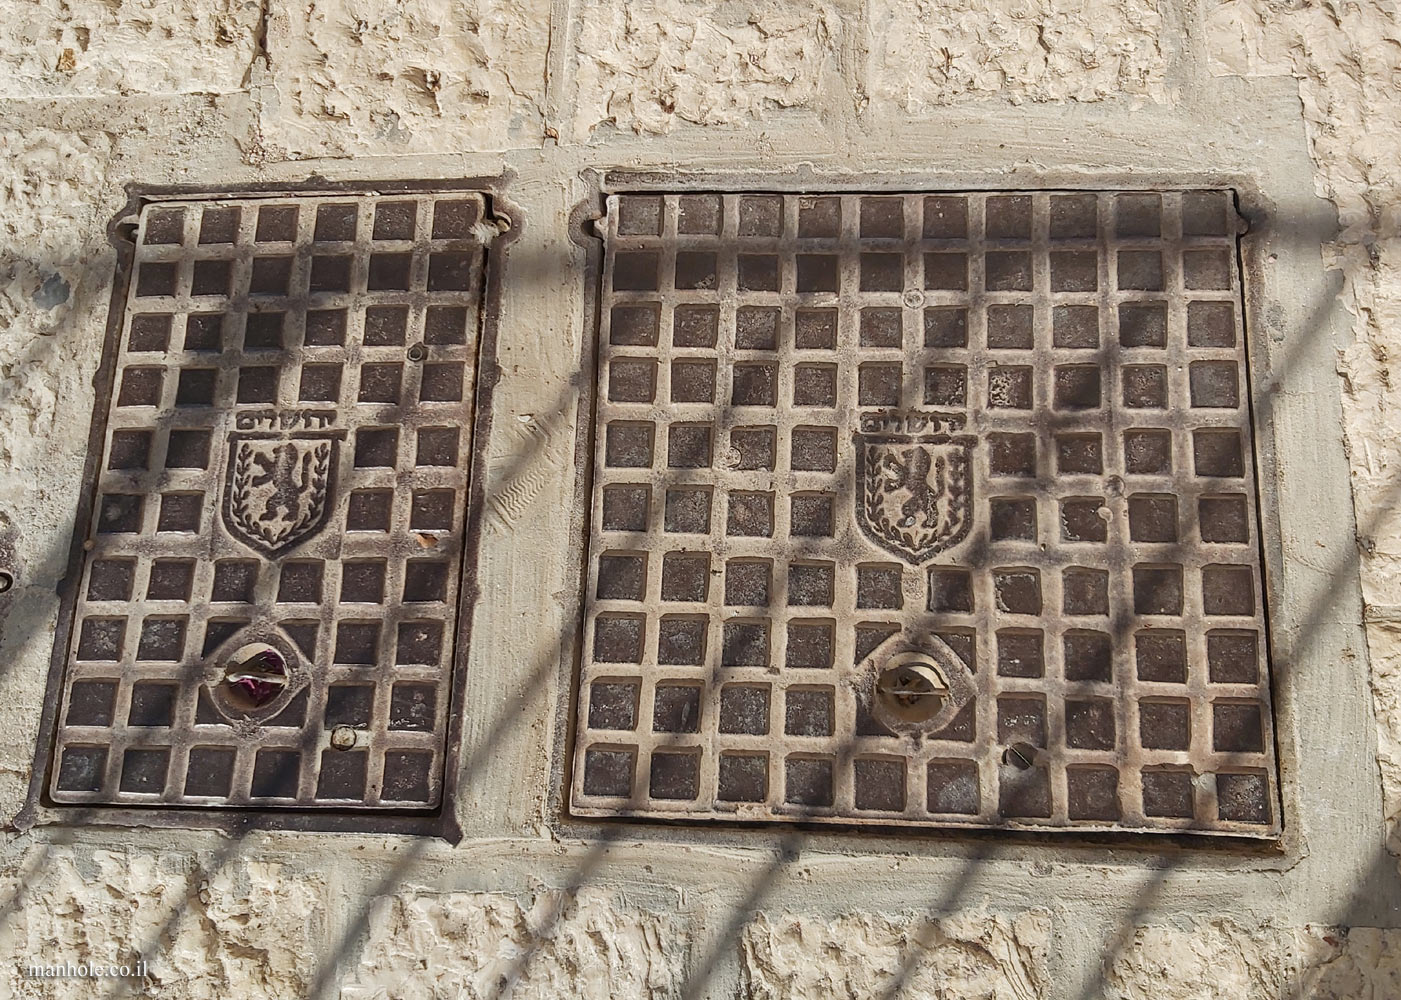 Jerusalem-Yemin Moshe - a cover with a background of squares and the city emblem in the center